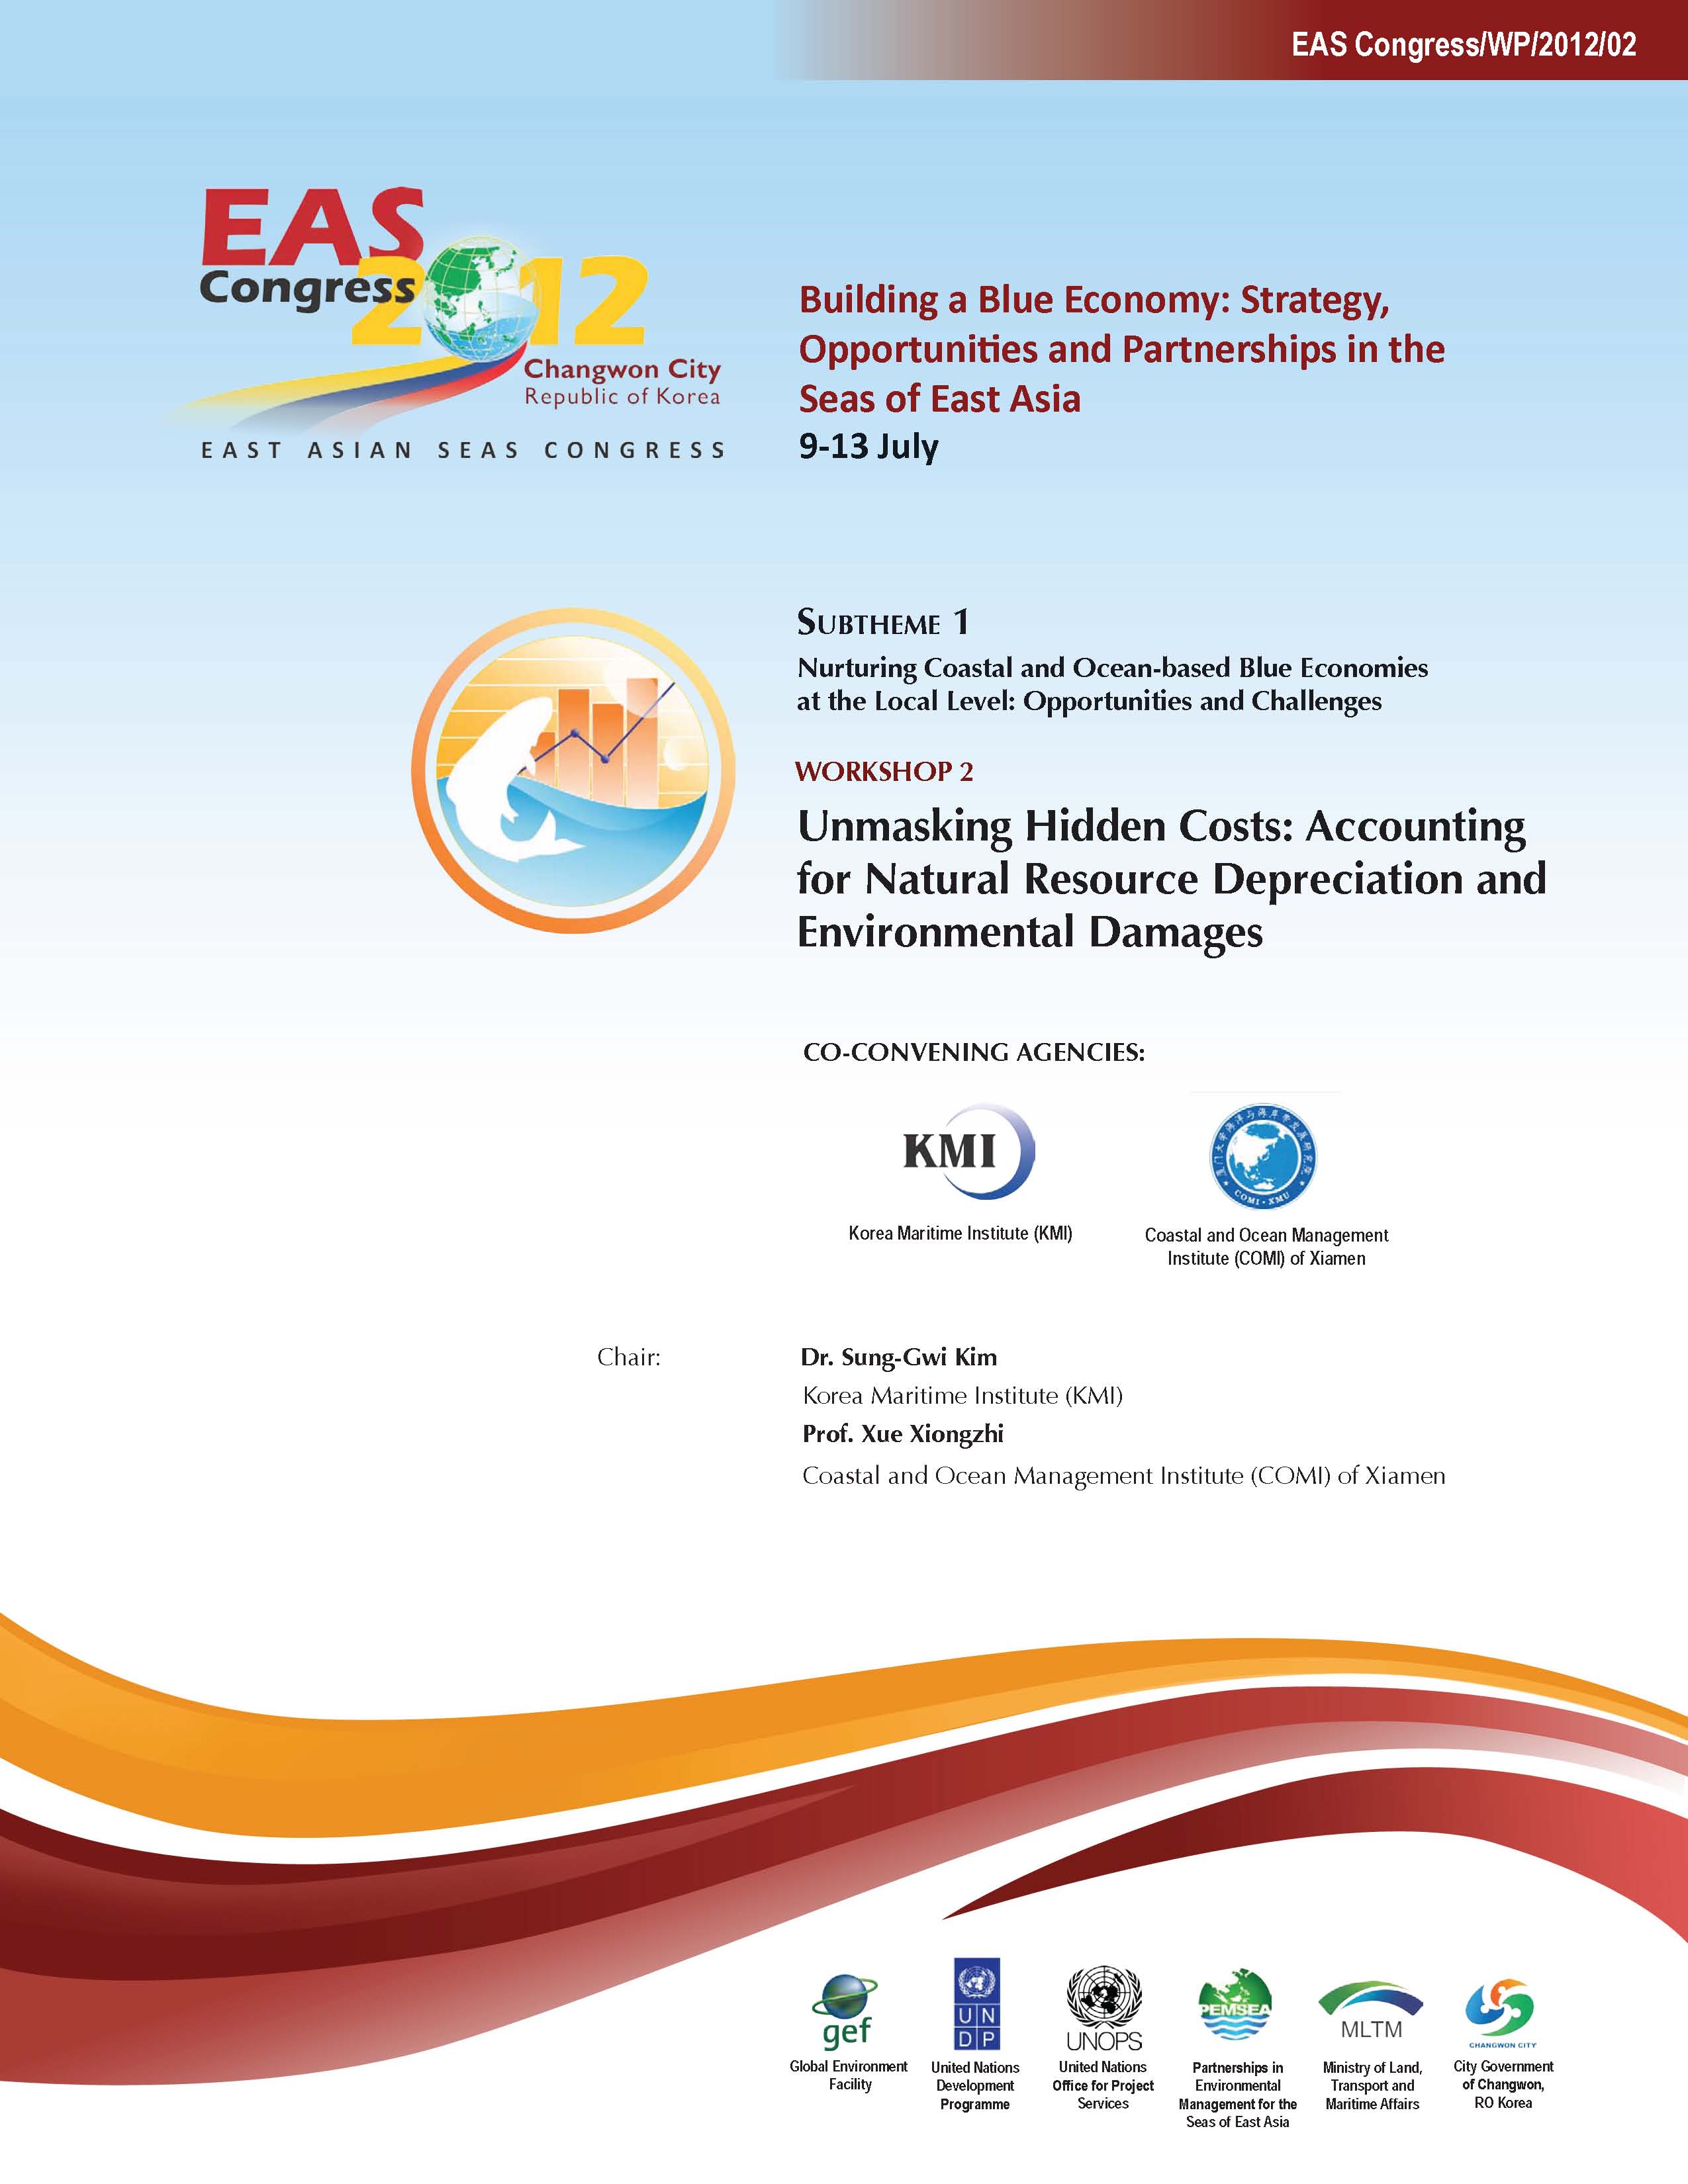 Proceedings of the Workshop on Unmasking Hidden Costs Accounting for Natural Resource Depreciation and Environmental Damages